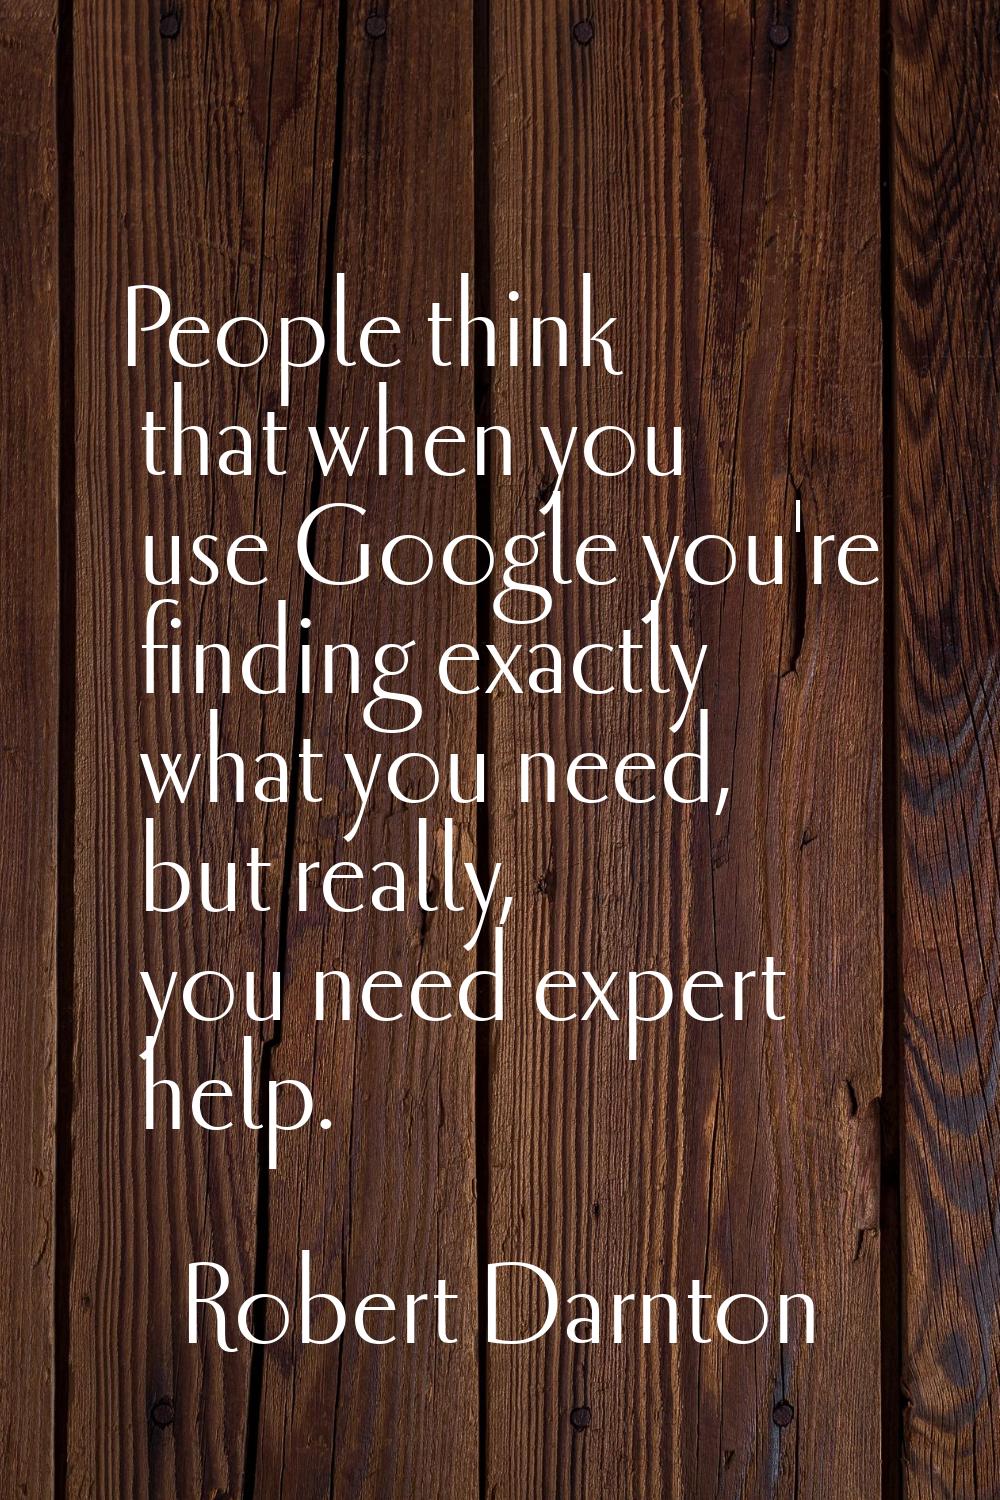 People think that when you use Google you're finding exactly what you need, but really, you need ex